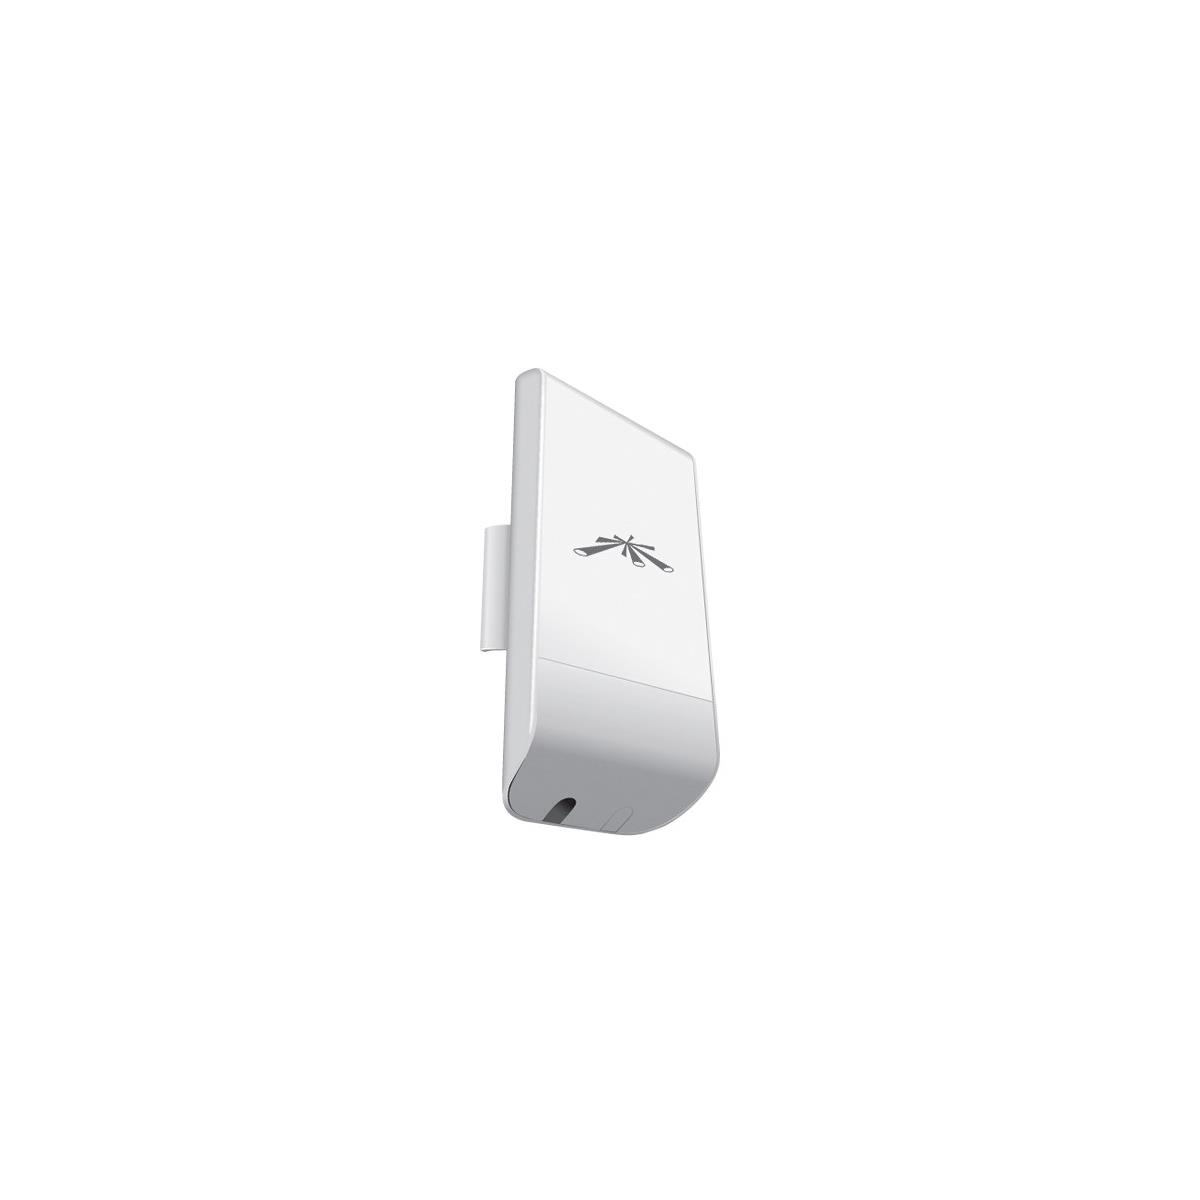 Image of Ubiquiti Networks NanoStationlocoM2 2.4GHz Outdoor Wireless CPE Router